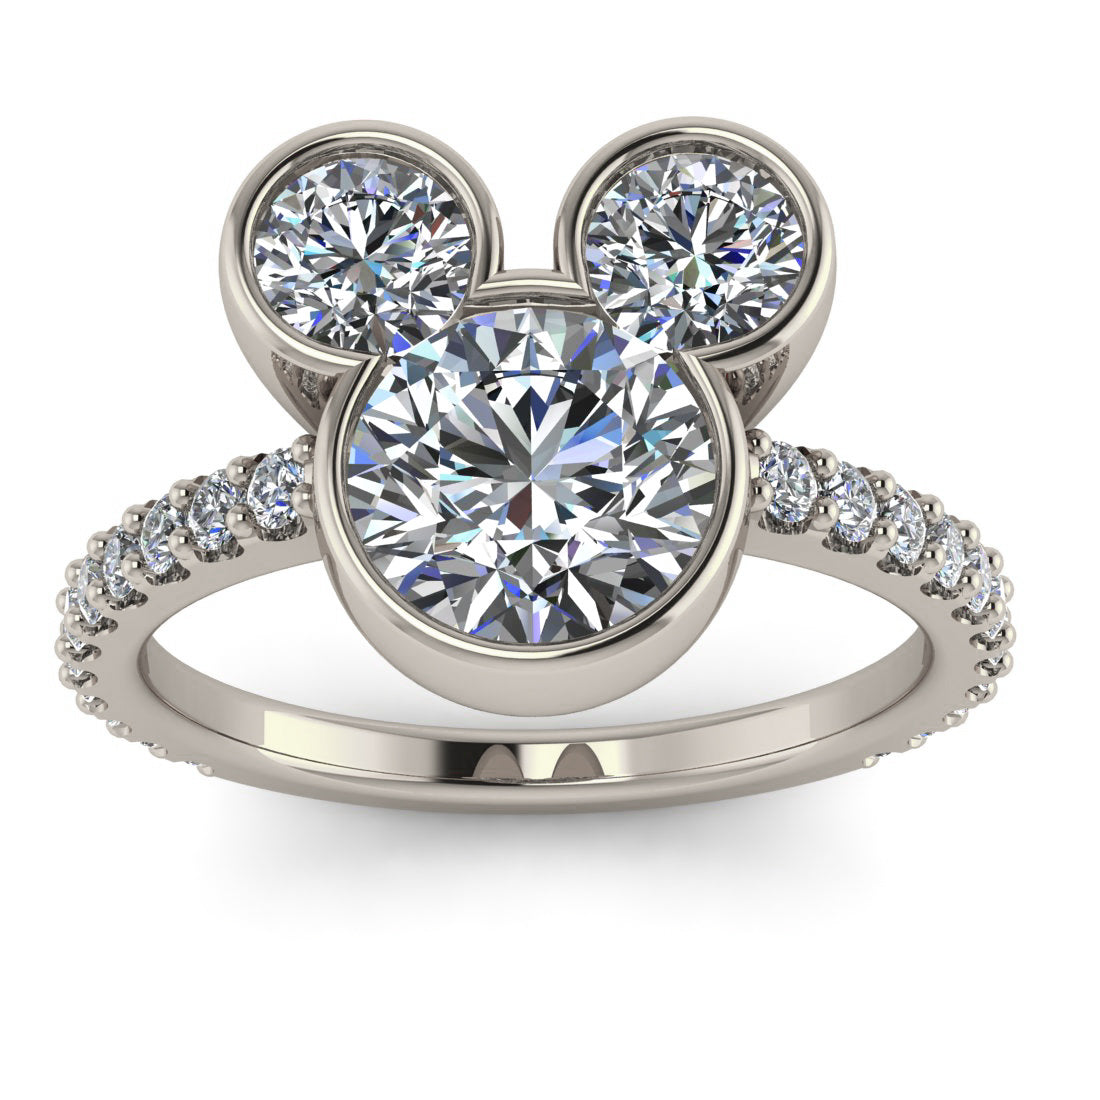 Magically Inspired Mouse Ears Engagement Ring - The Mouse